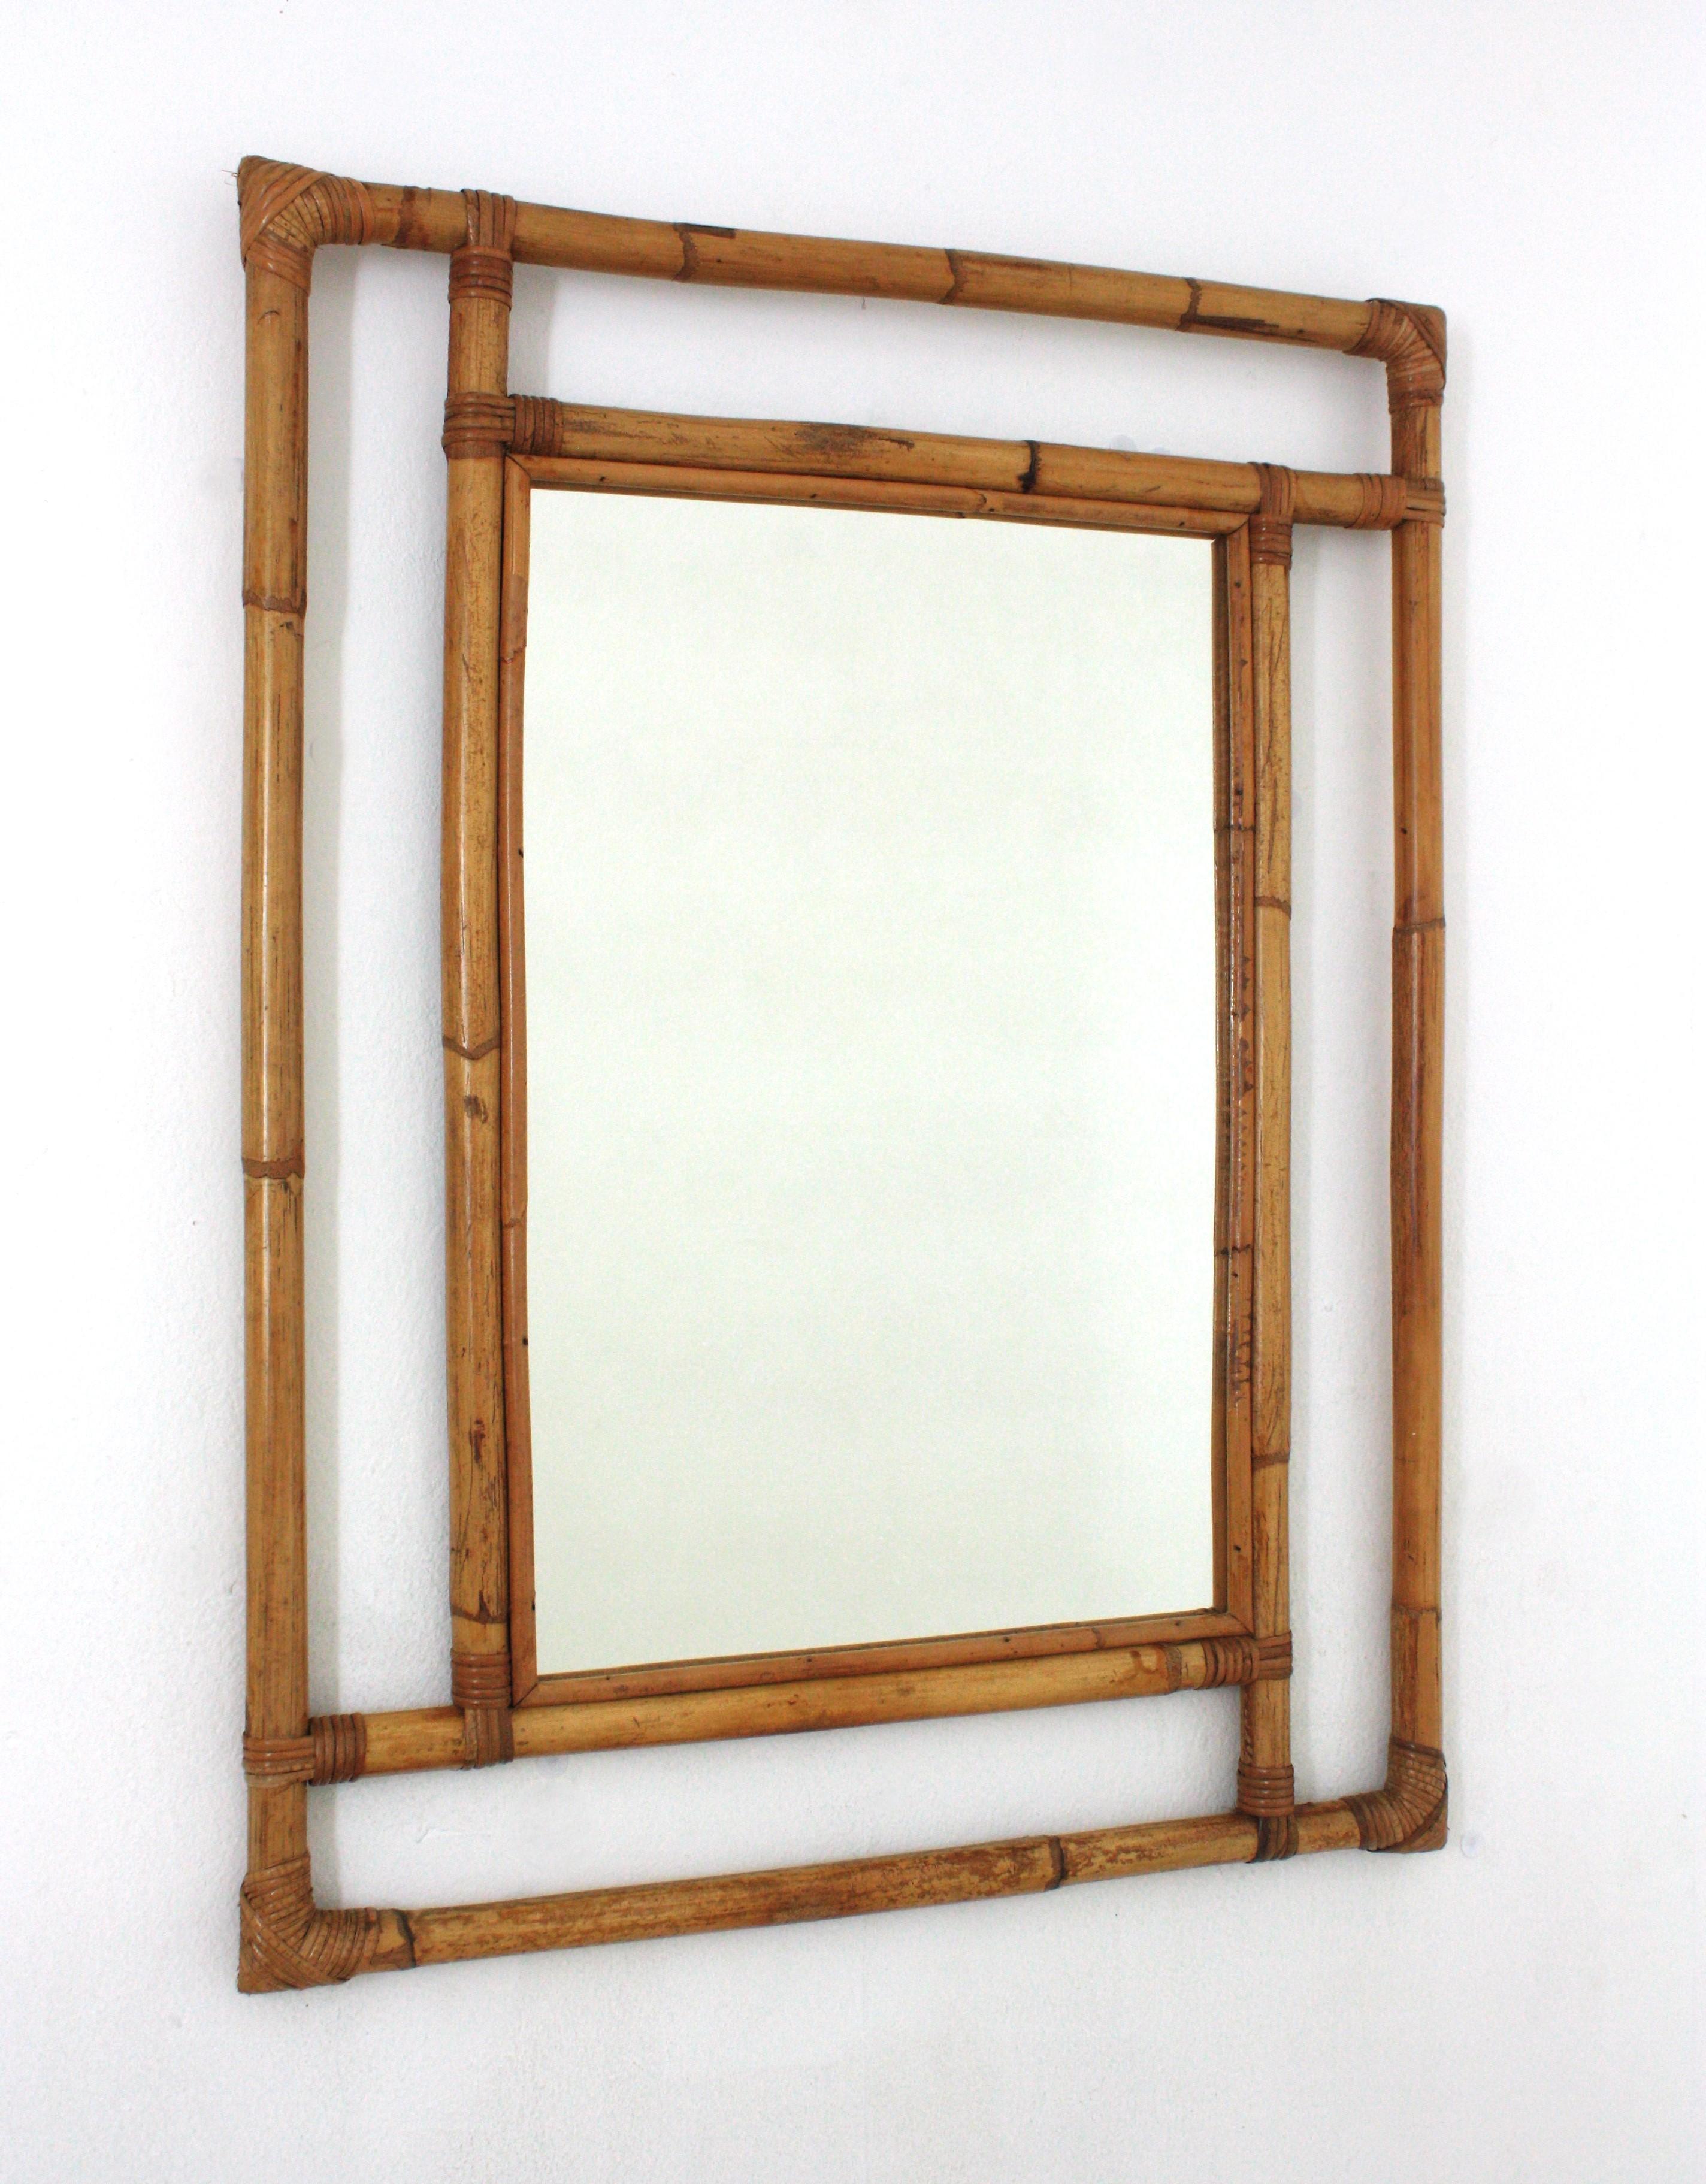 Rattan Bamboo Rectangular Wall Mirror
Gorgeous Tiki style rectangular mirror handcrafted with bamboo cane. Spain, 1960s.
Highly decorative handcrafted bamboo frame with geometric shapes, oriental accents and a large glass surface,
This mirror is in